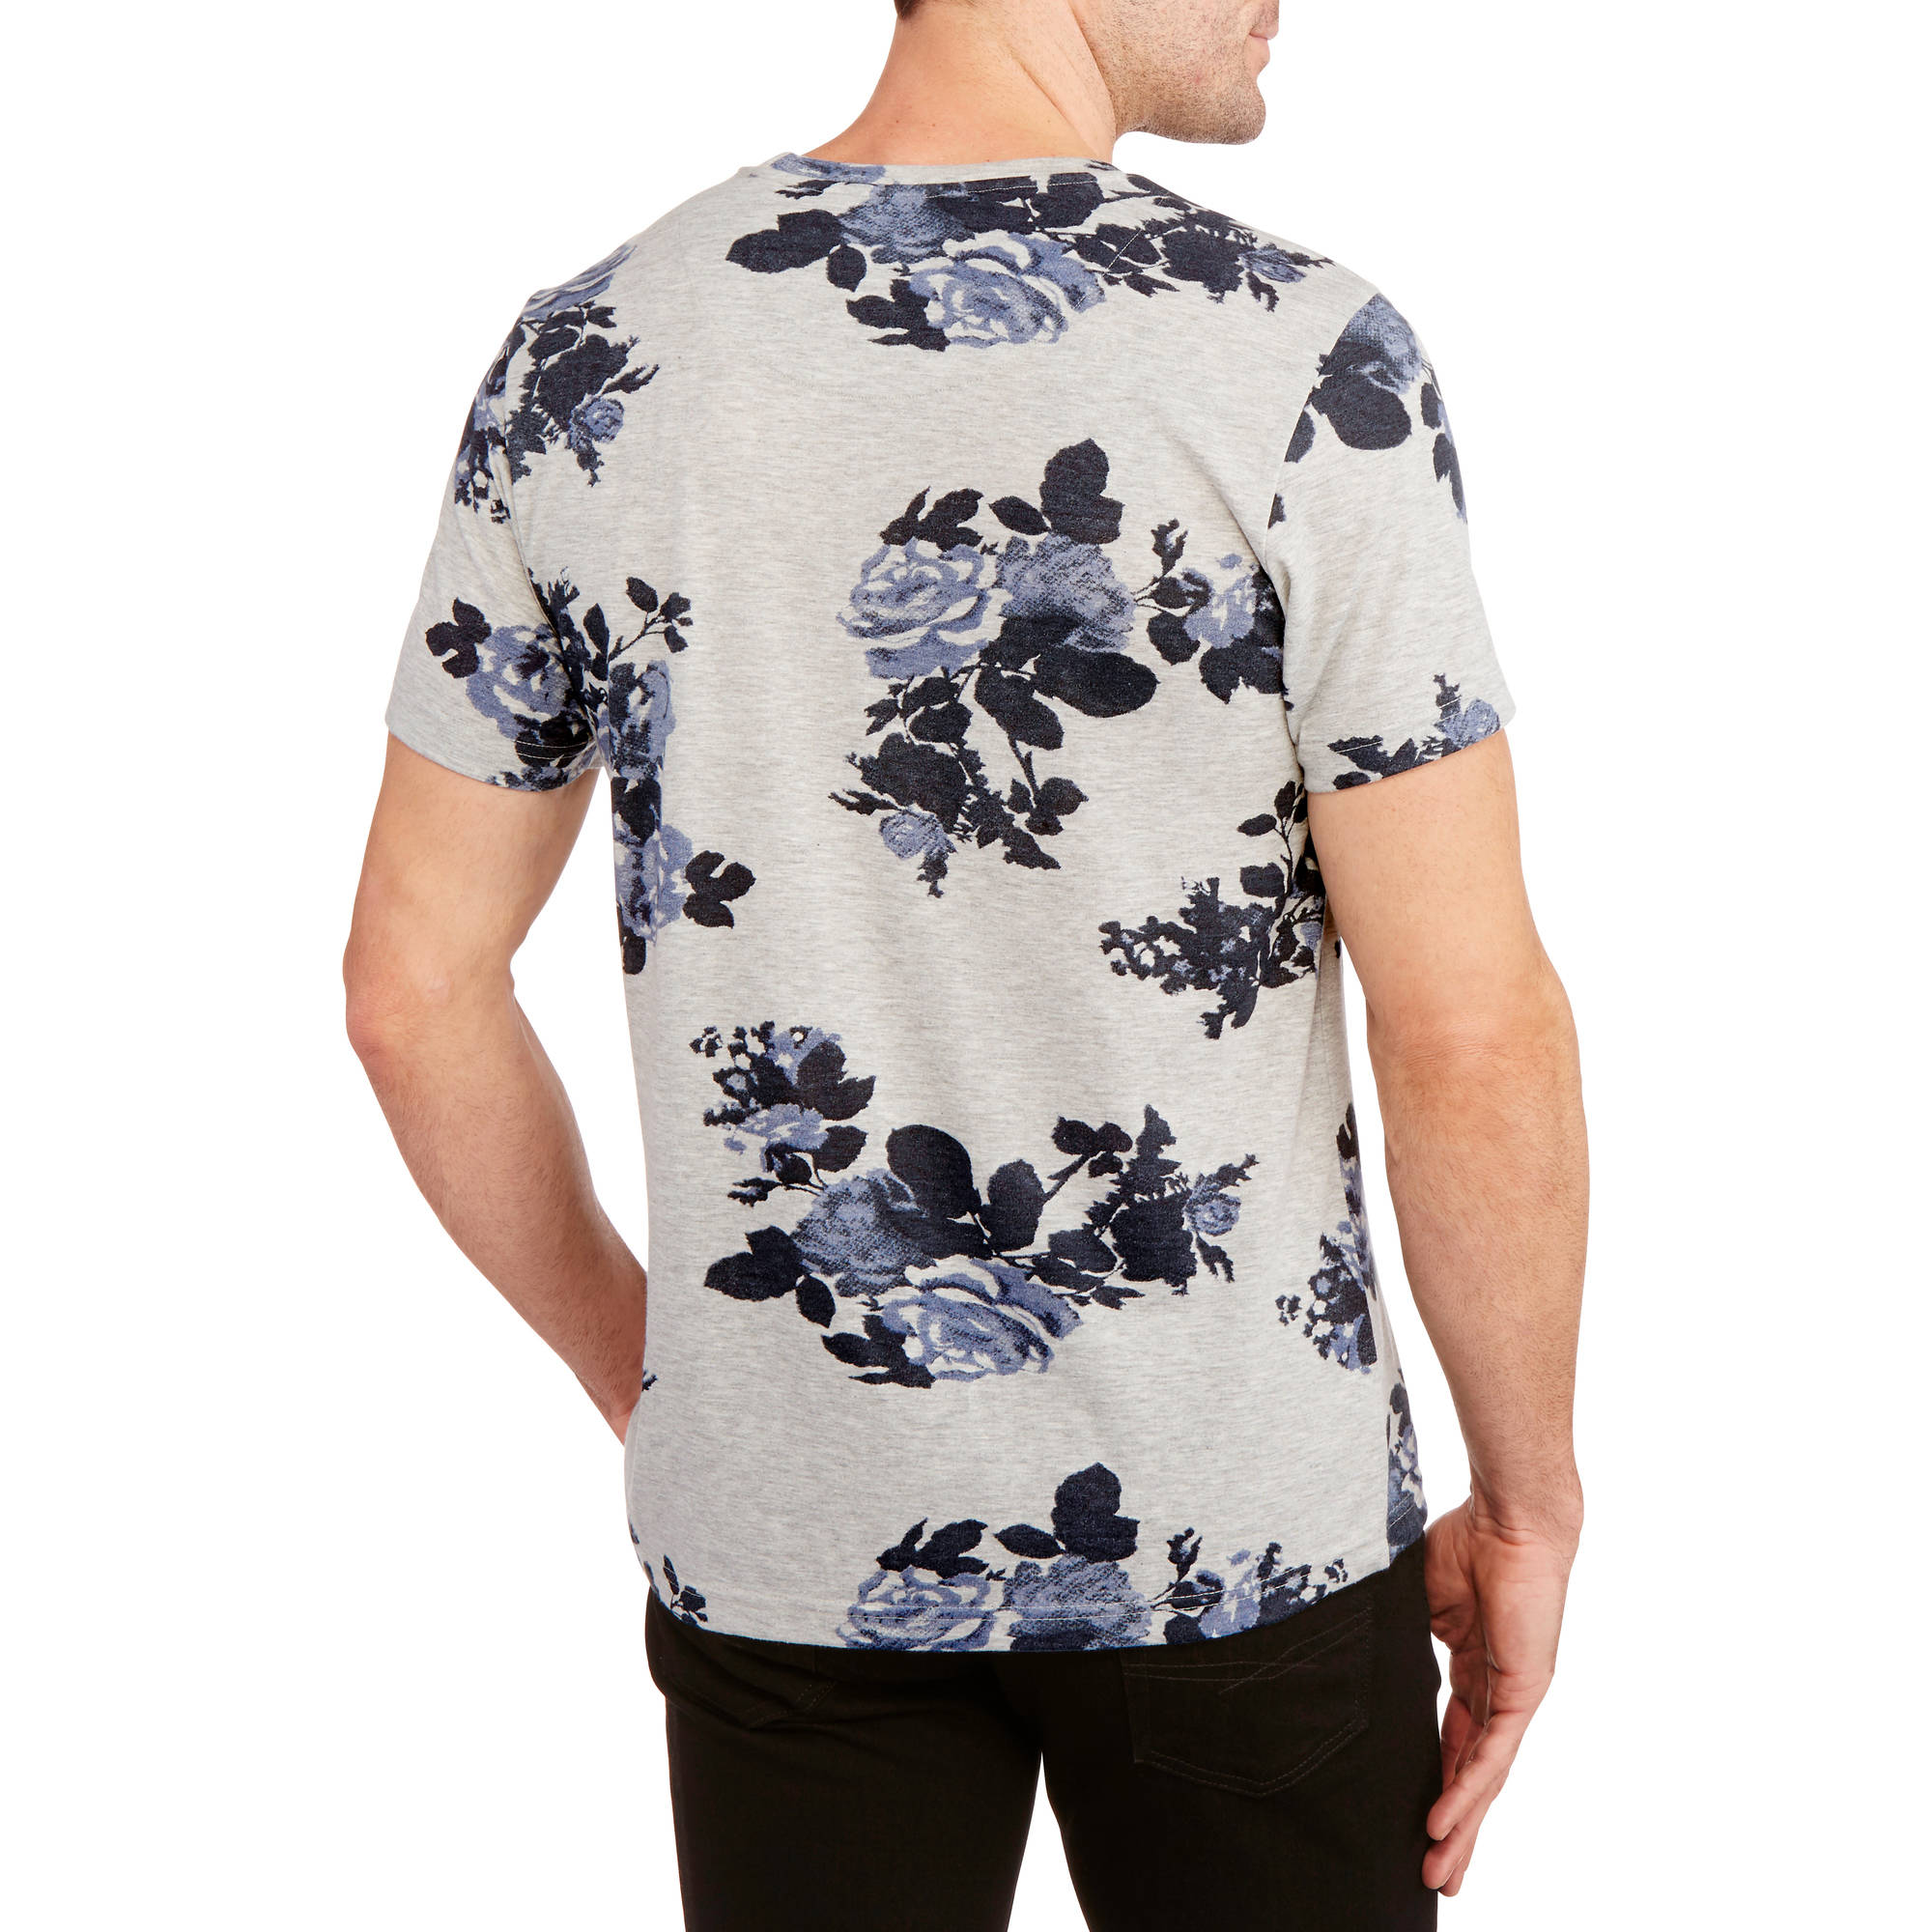 Floral Printed Men's Graphic Tee - image 2 of 2